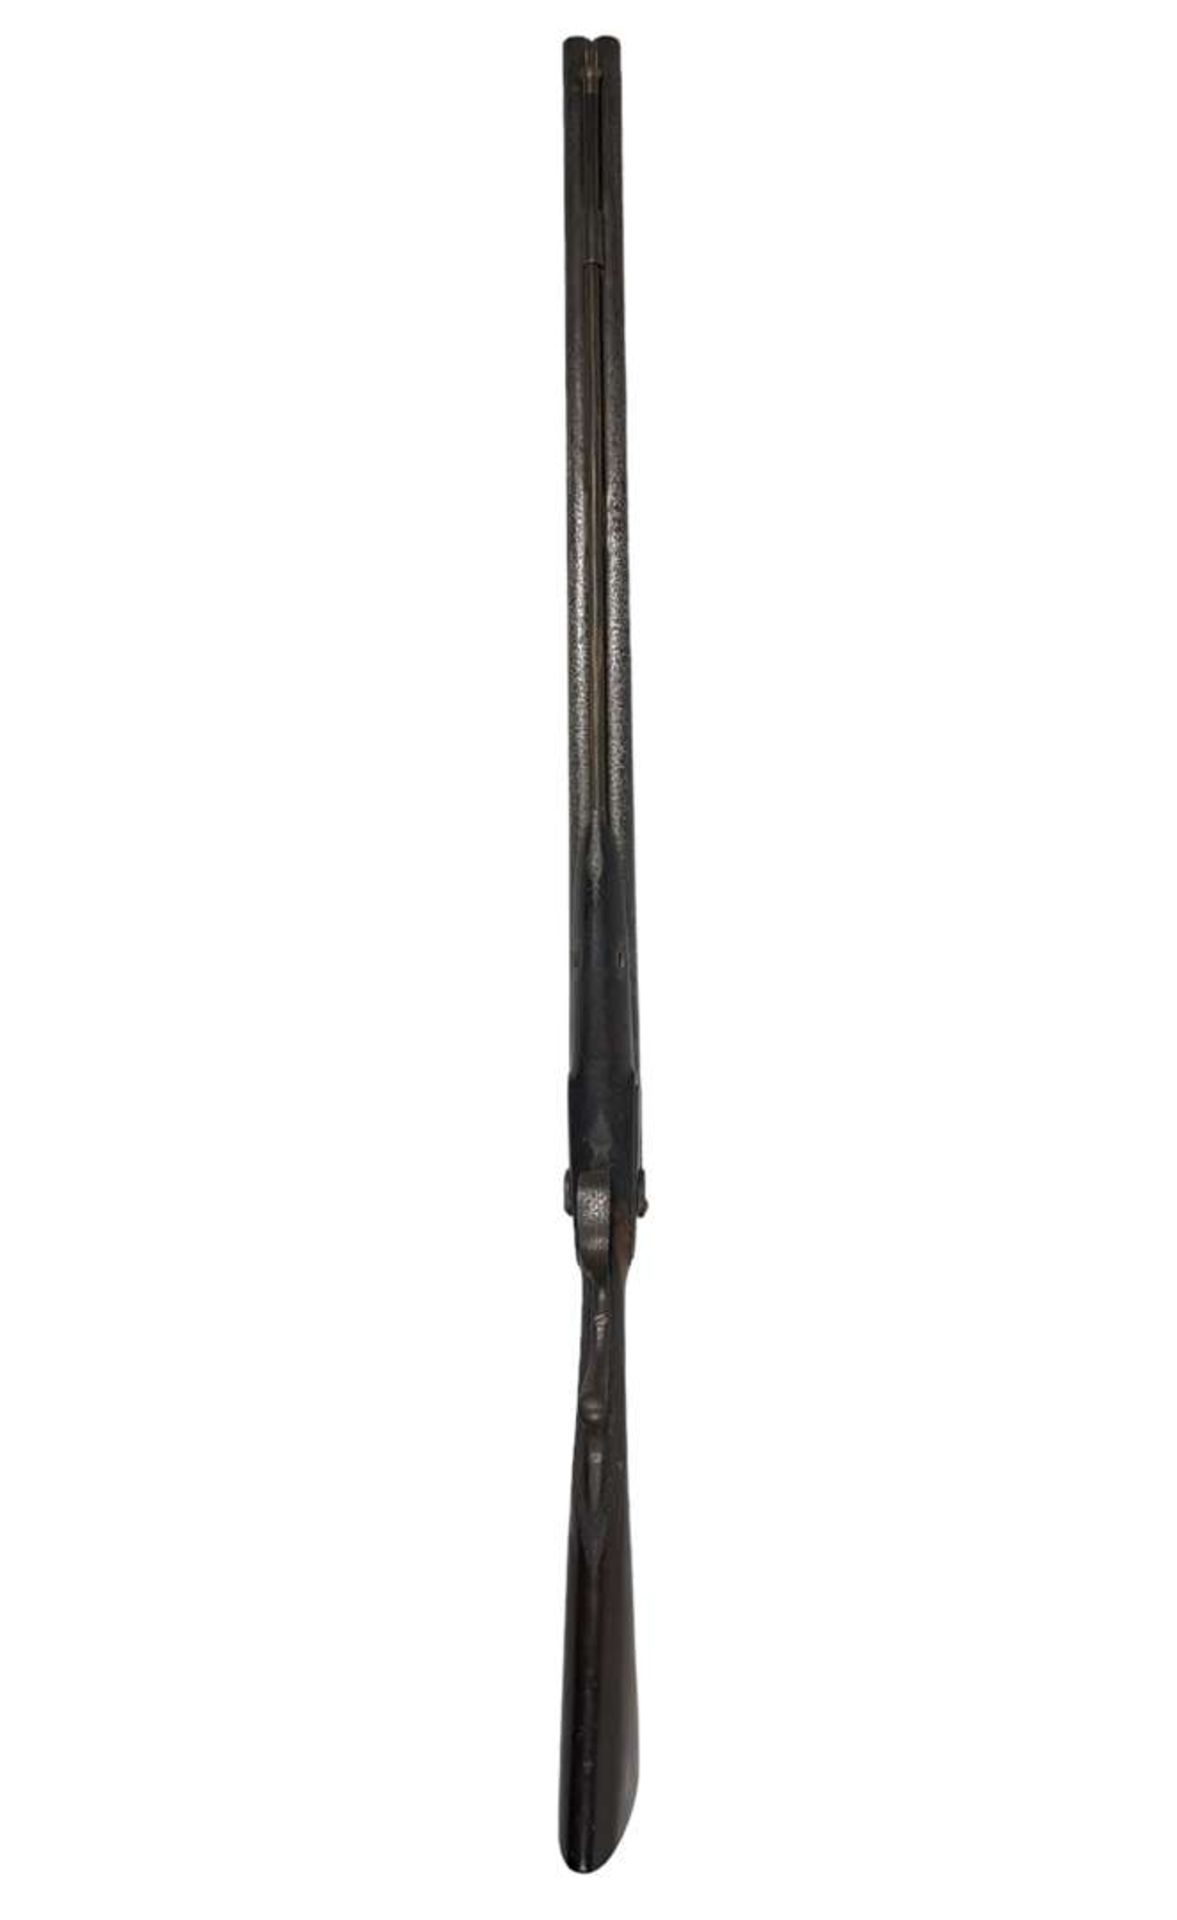 18th/19th Century Percussion Double Barrel Hunting Rifle - Image 7 of 7